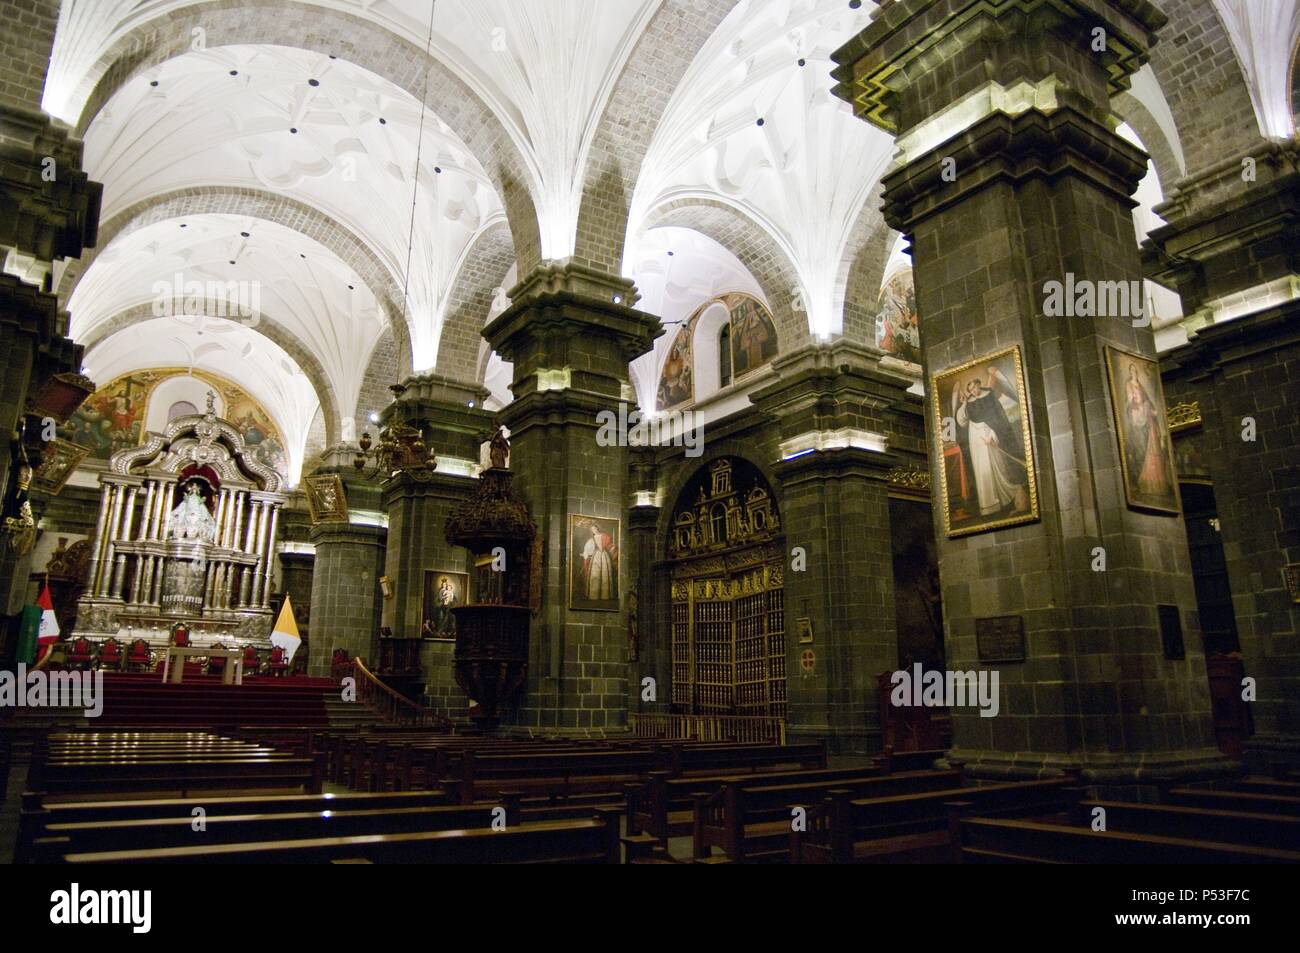 Peru. Cusco city. Interior of The Cathedral. . Stock Photo